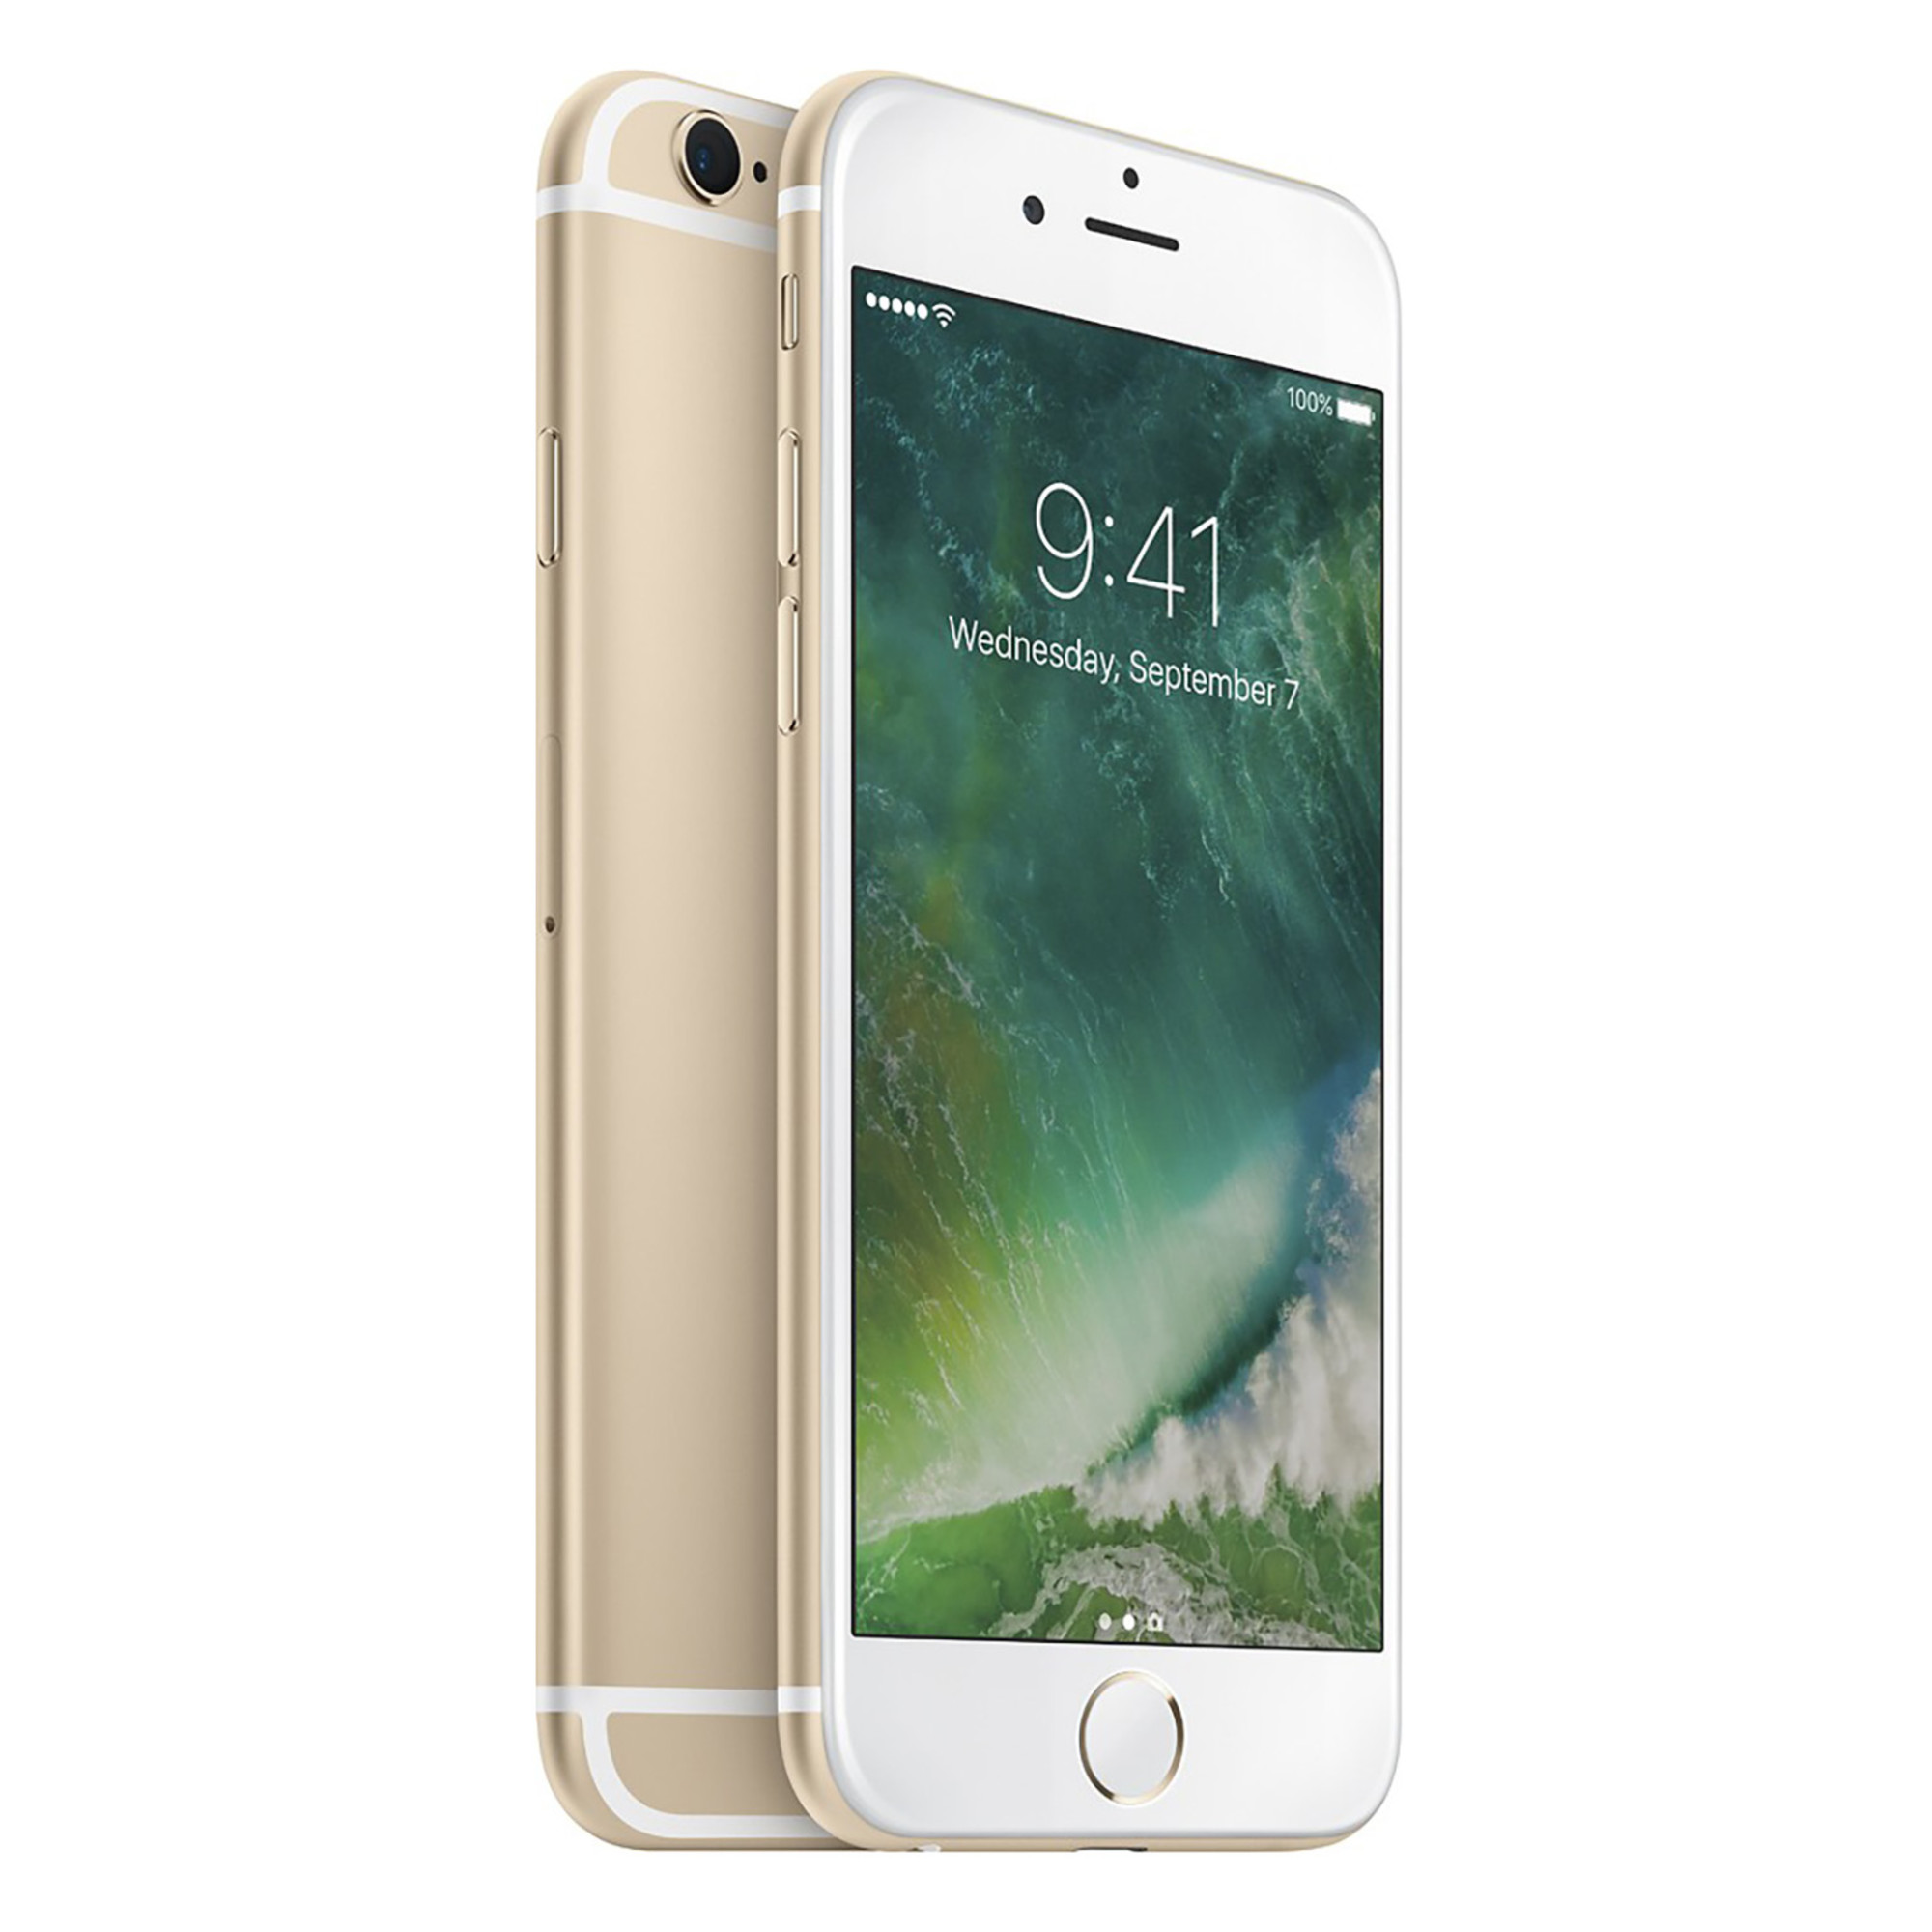 Pre-Owned Apple iPhone 6s 64GB GSM Phone - Gold + WeCare Alcohol Wipes Pack (50 Wipes) - image 1 of 6